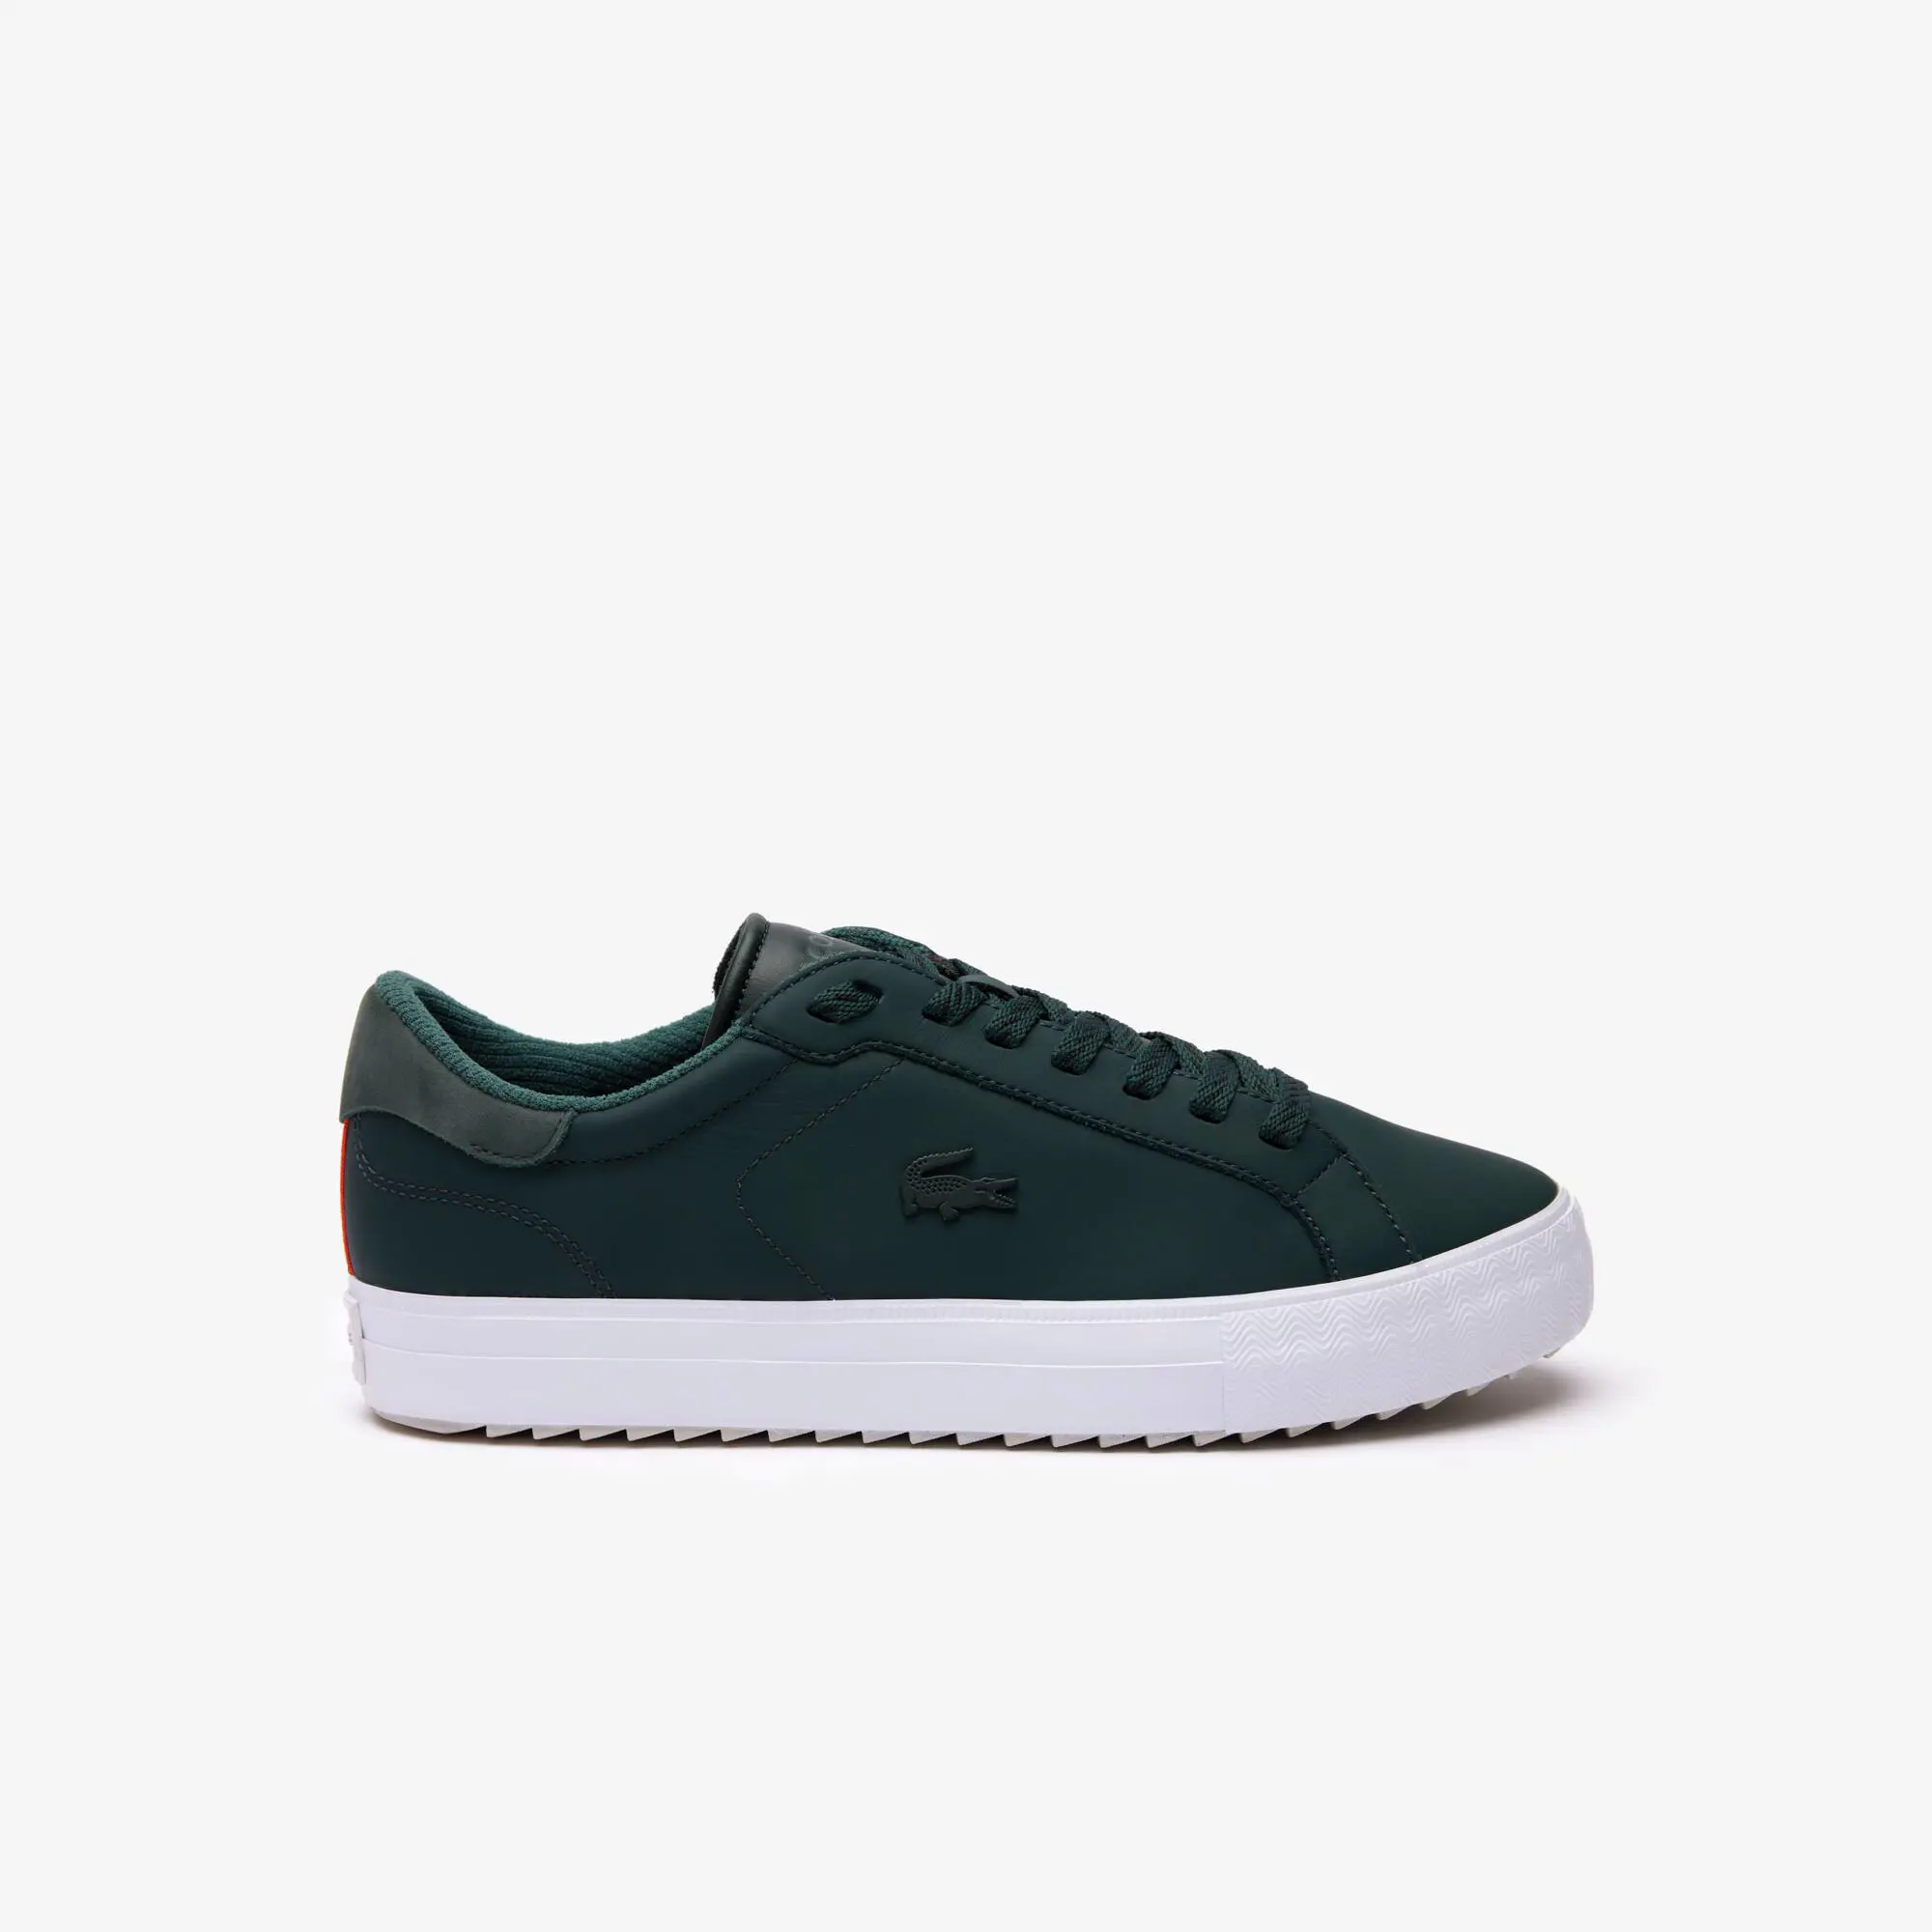 Lacoste Men's Powercourt Winter Leather Outdoor Trainers. 1